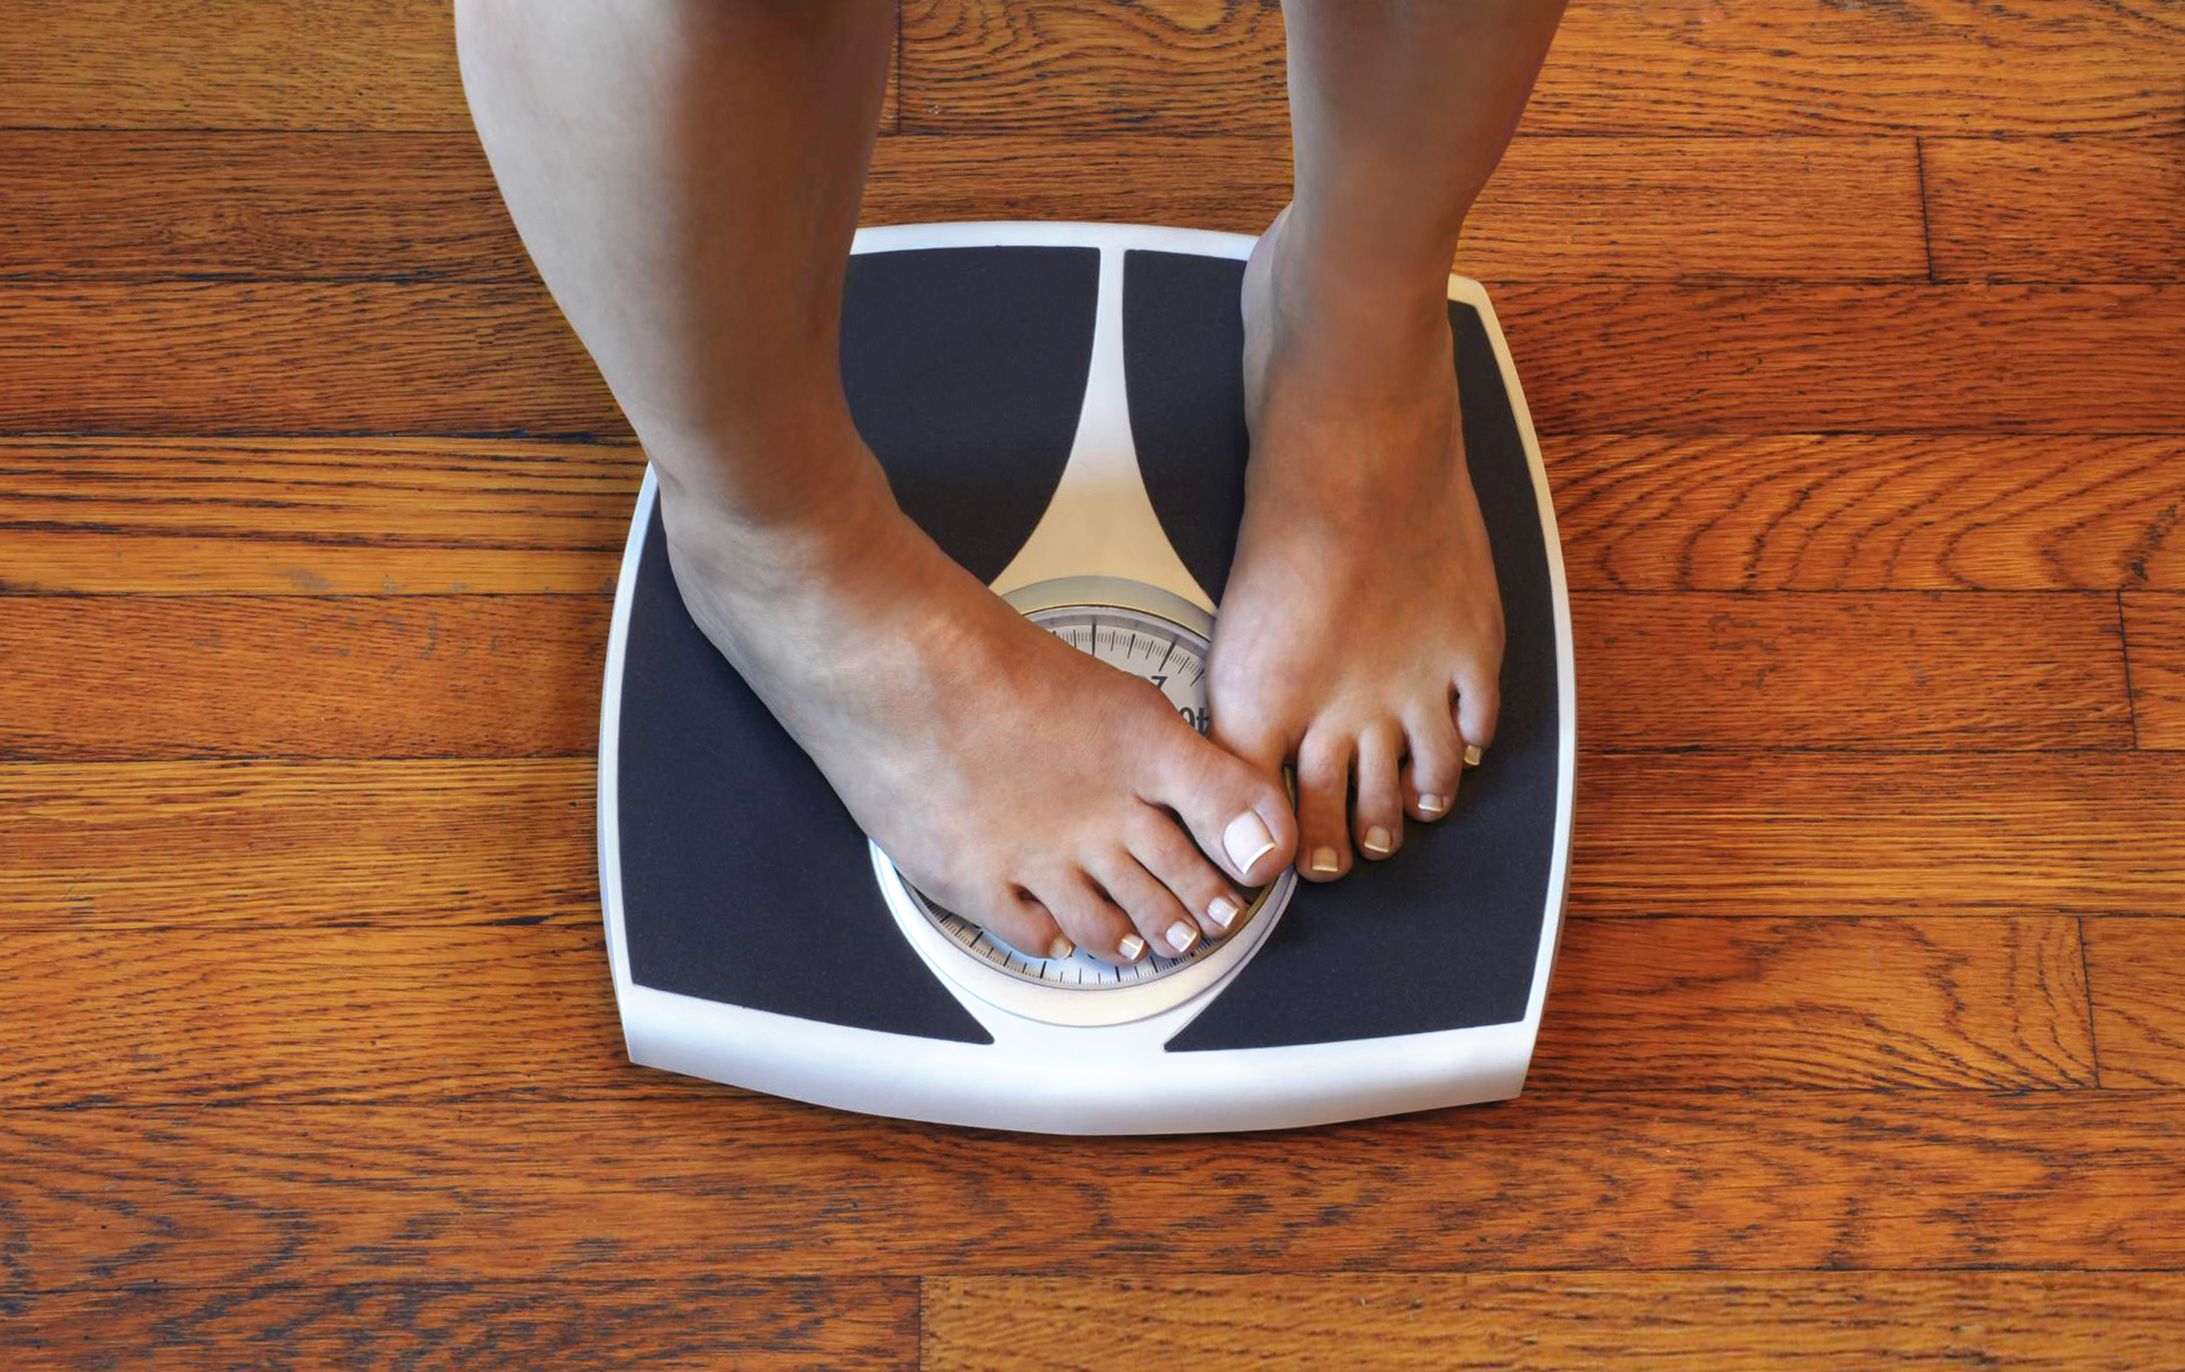 Weight Fluctuation in Women: Why Does My Weight Fluctuate?